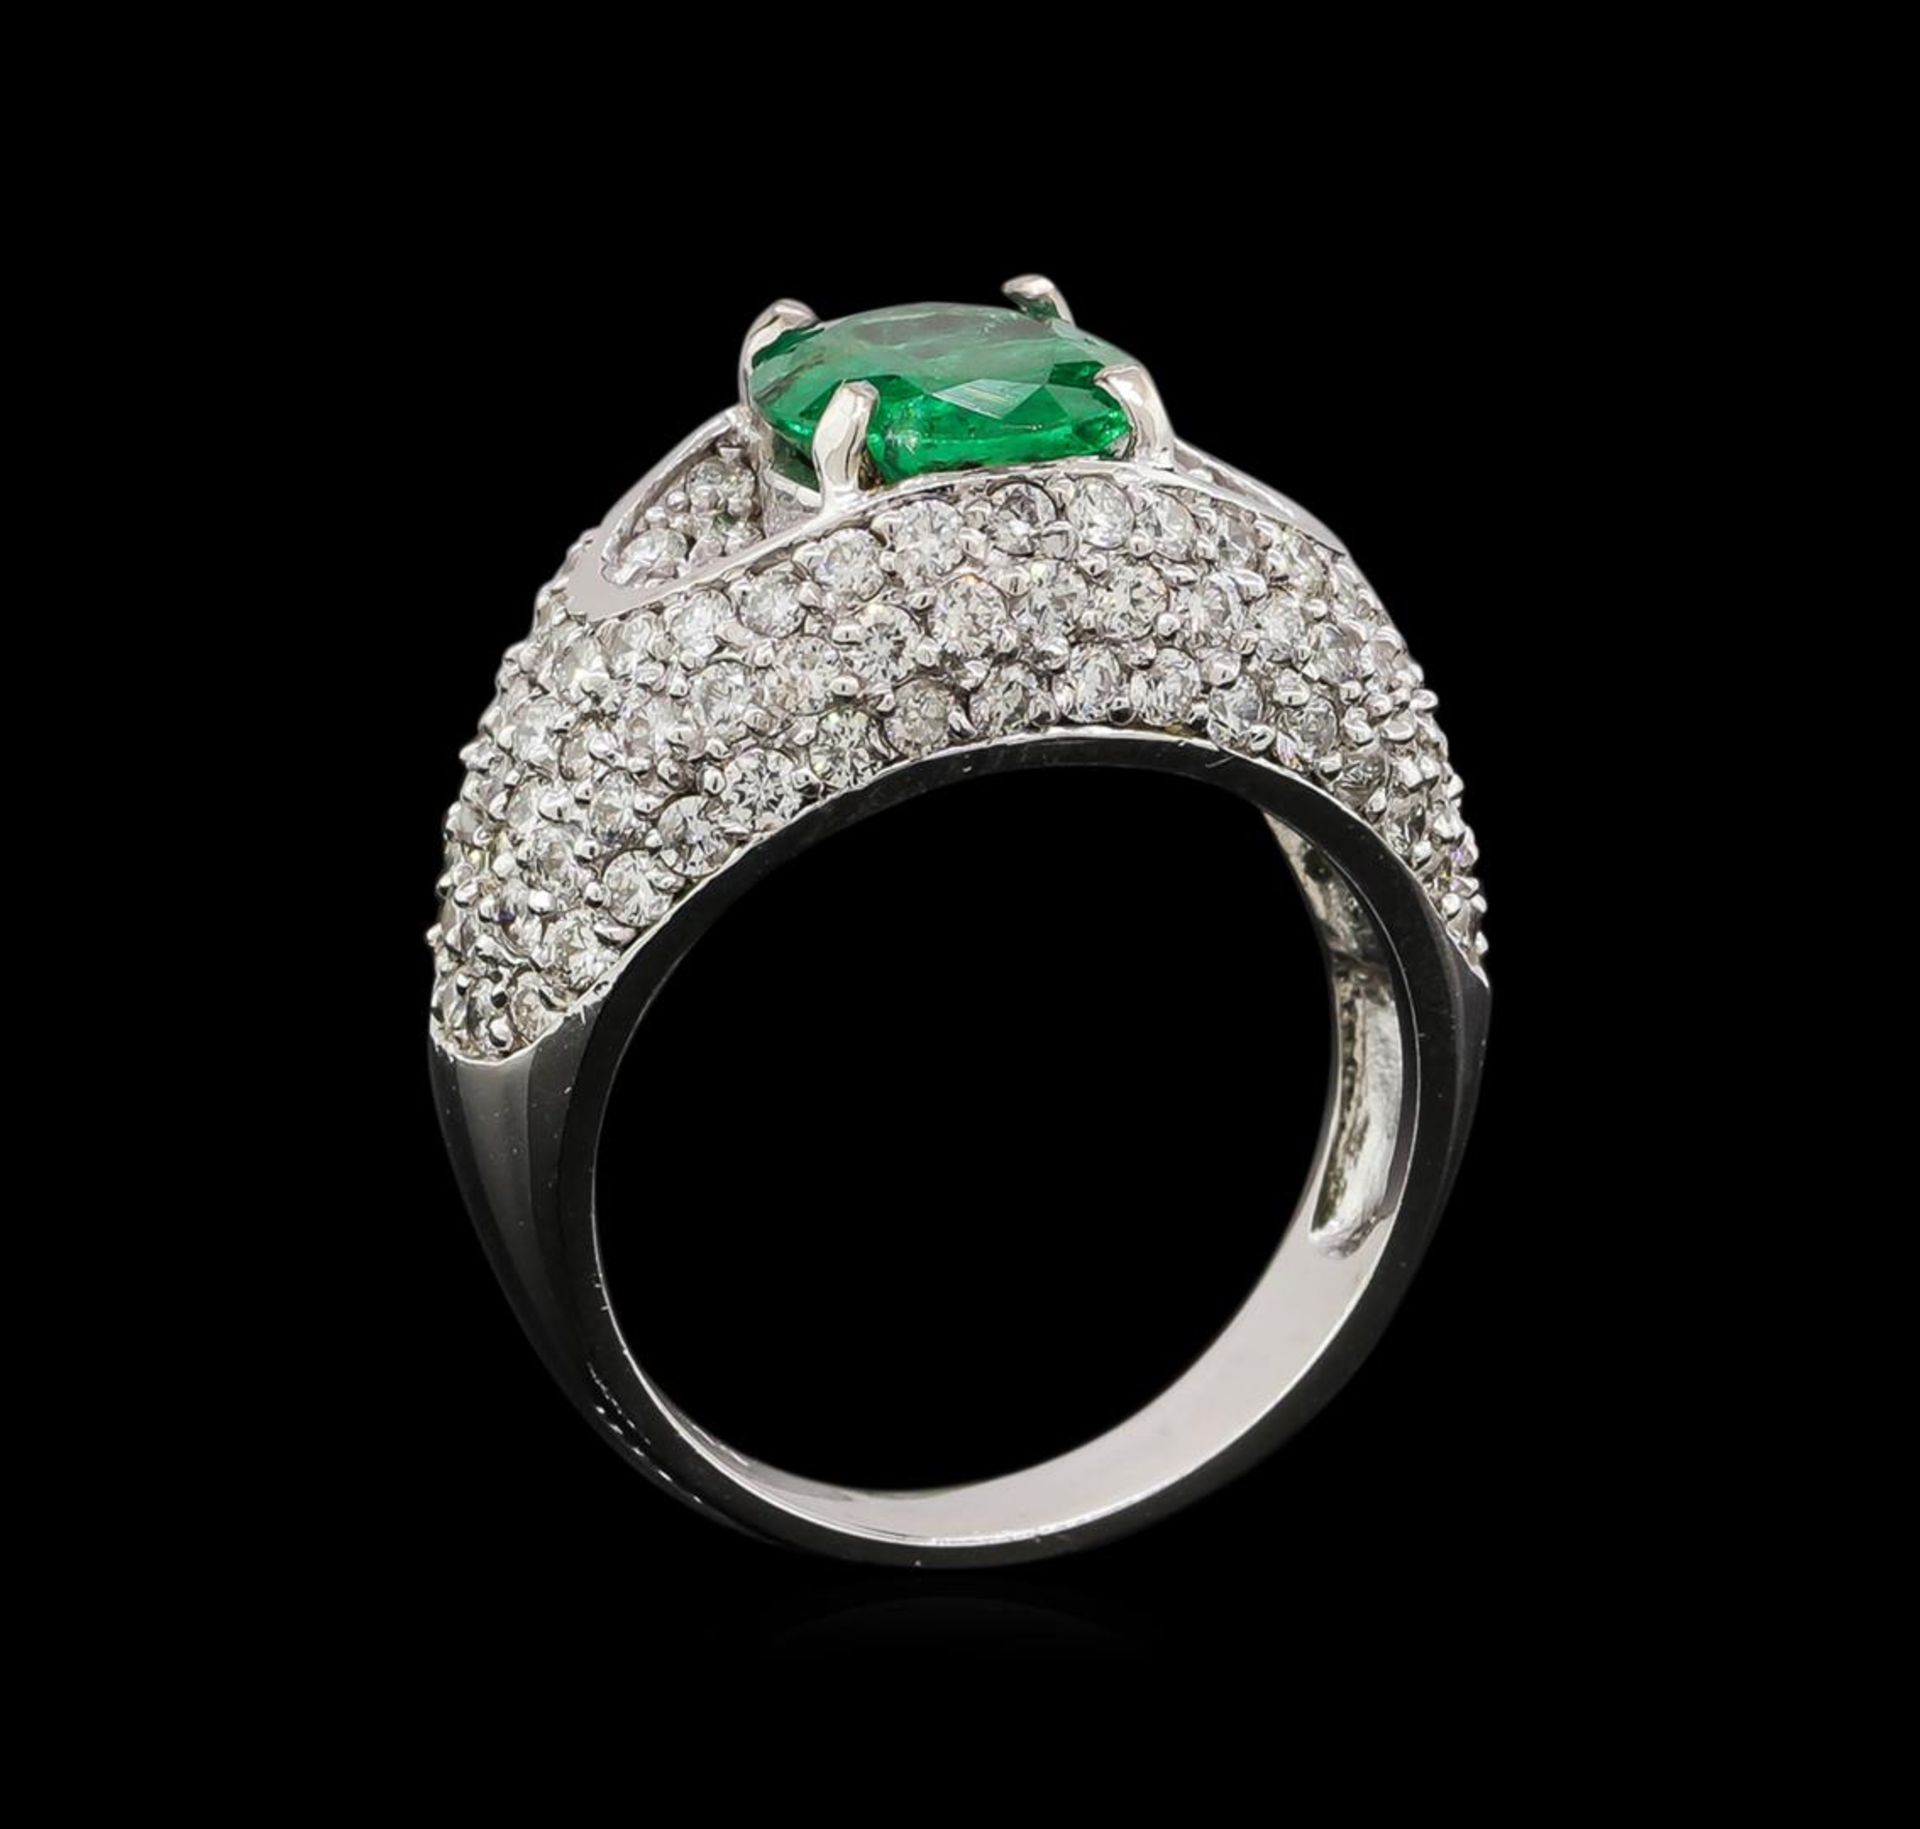 14KT White Gold 2.50 ctw Emerald and Diamond Ring - Image 4 of 5